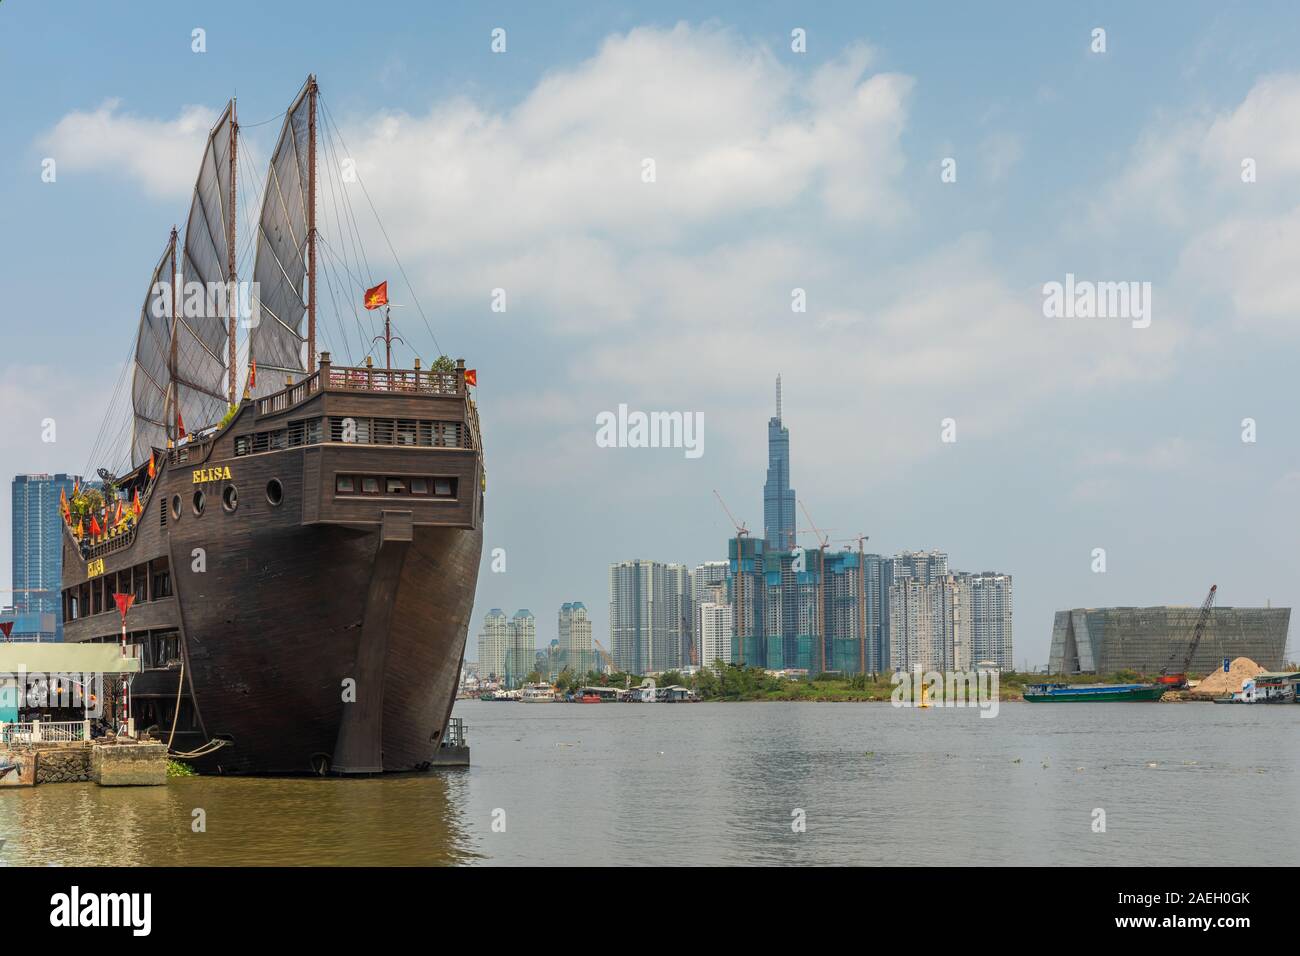 Ho Chi Minh City / Vietnam - March 03 2019: The ship 'Elisa', a floating restaurant (in shape of an Asian sailing ship) in the Saigon river.  G Stock Photo